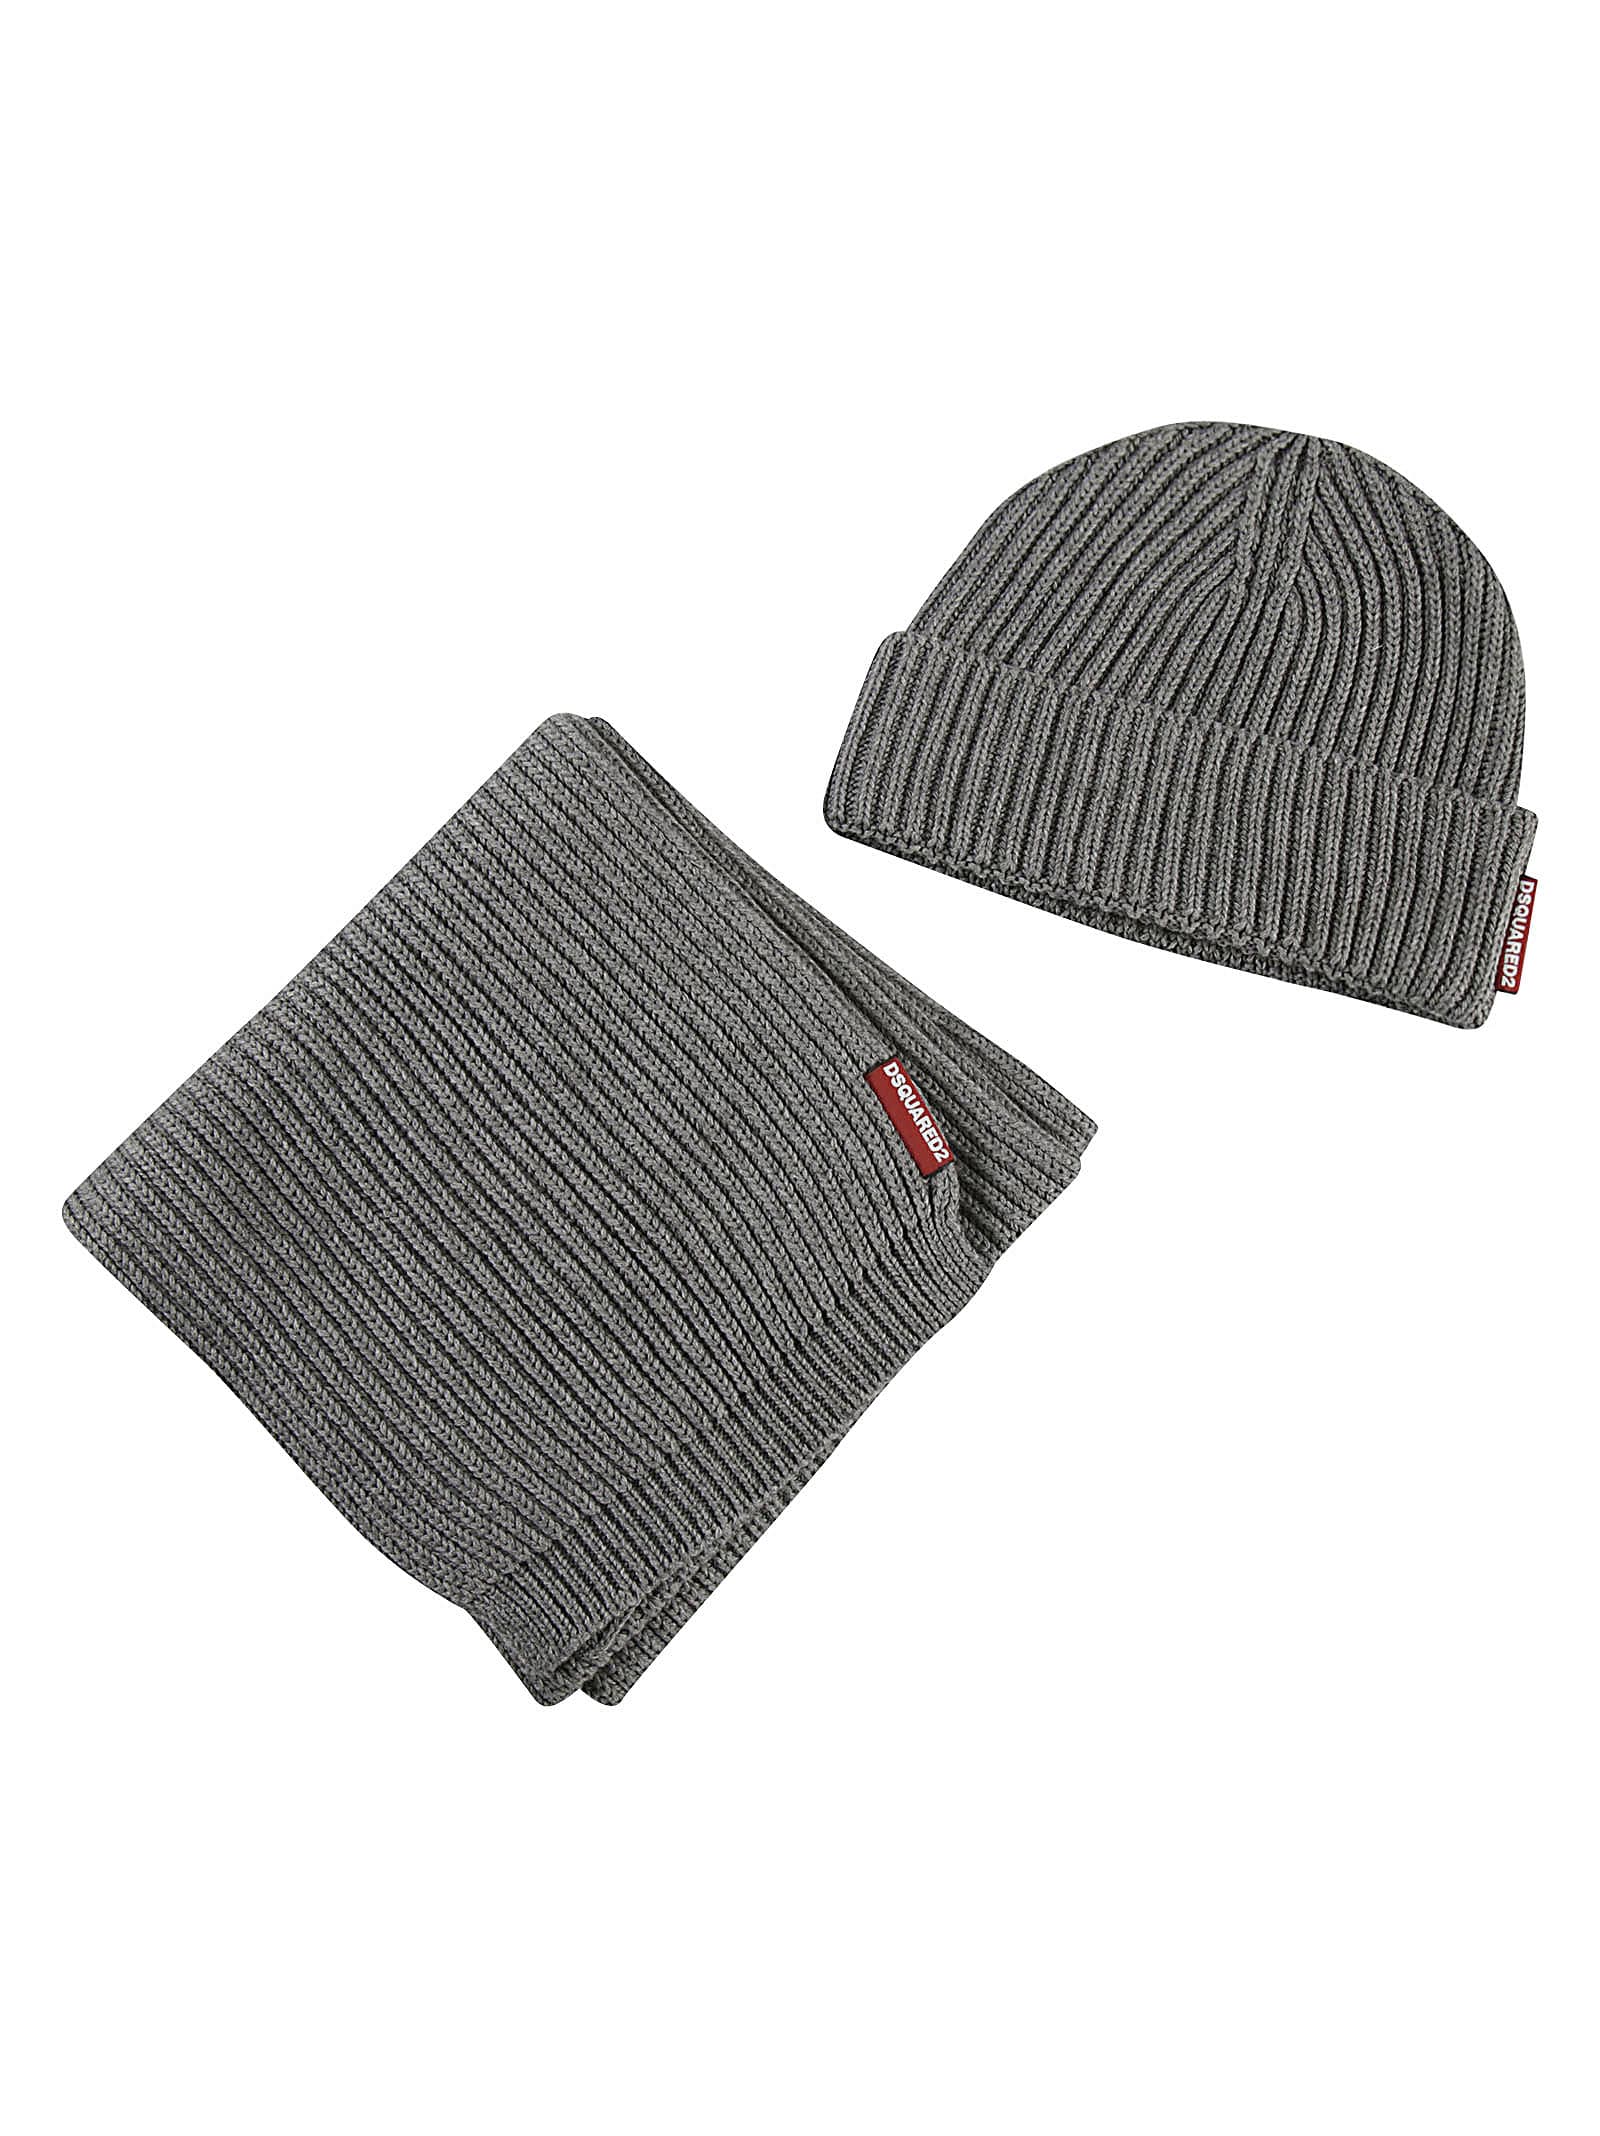 Dsquared2 Ribbed Knit Beanie Set